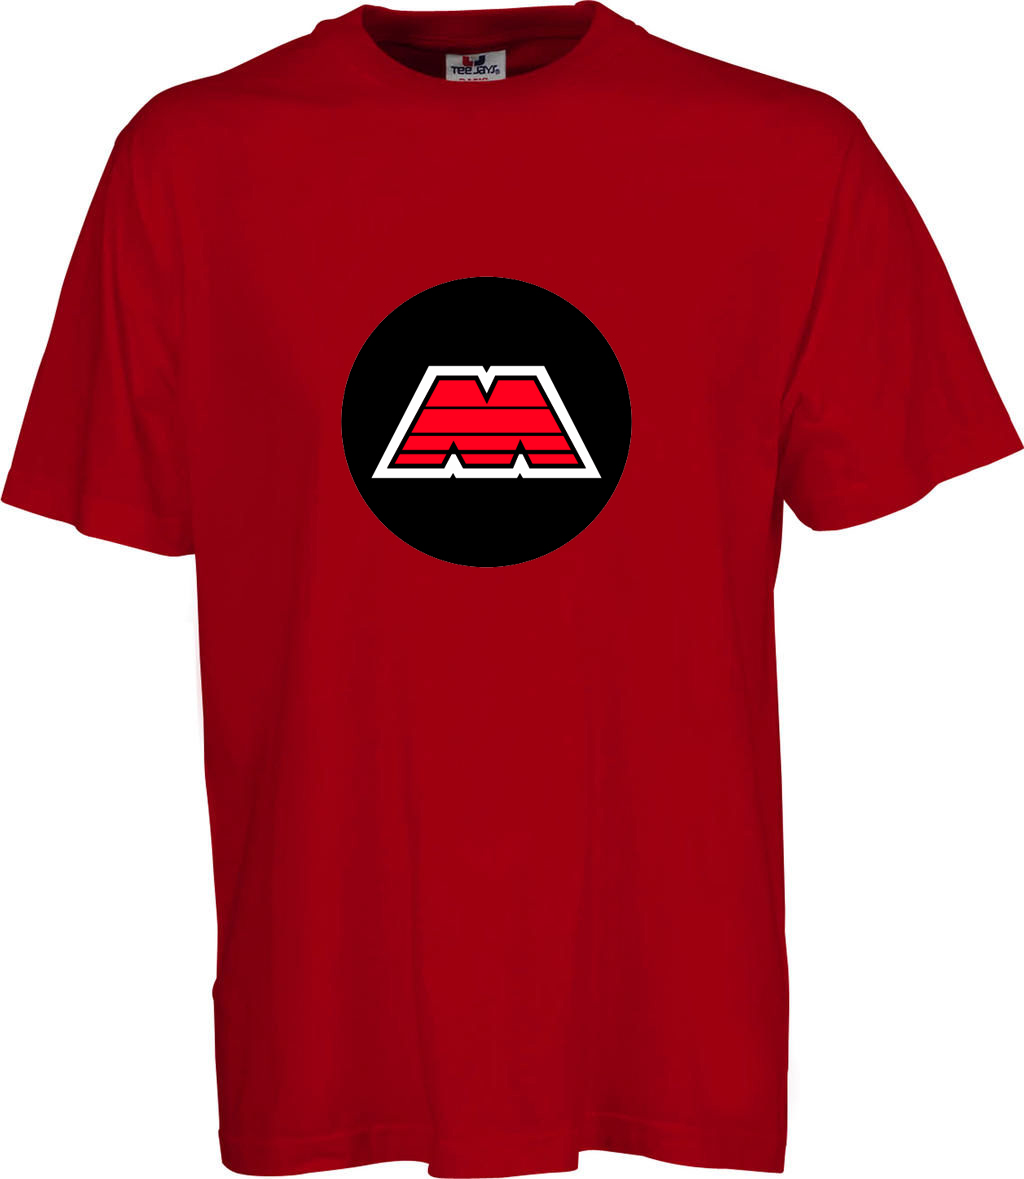 Immagine relativa a Mtron T- Shirt Red